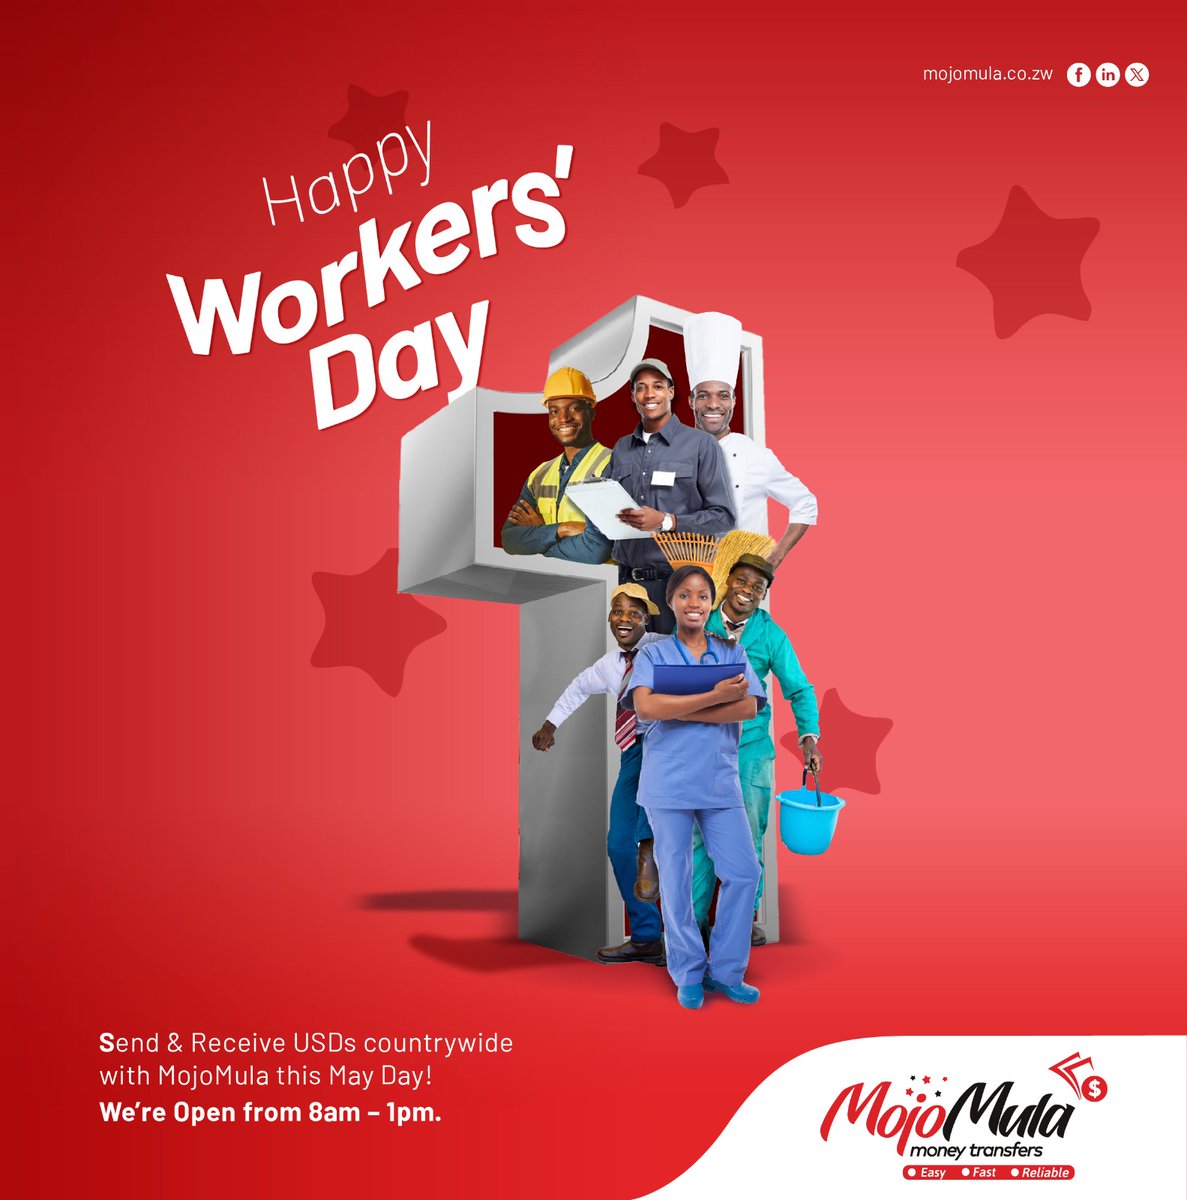 Happy Workers Day!

We are open today from 8am - 1pm. Come through!
#workersday #MojoMula